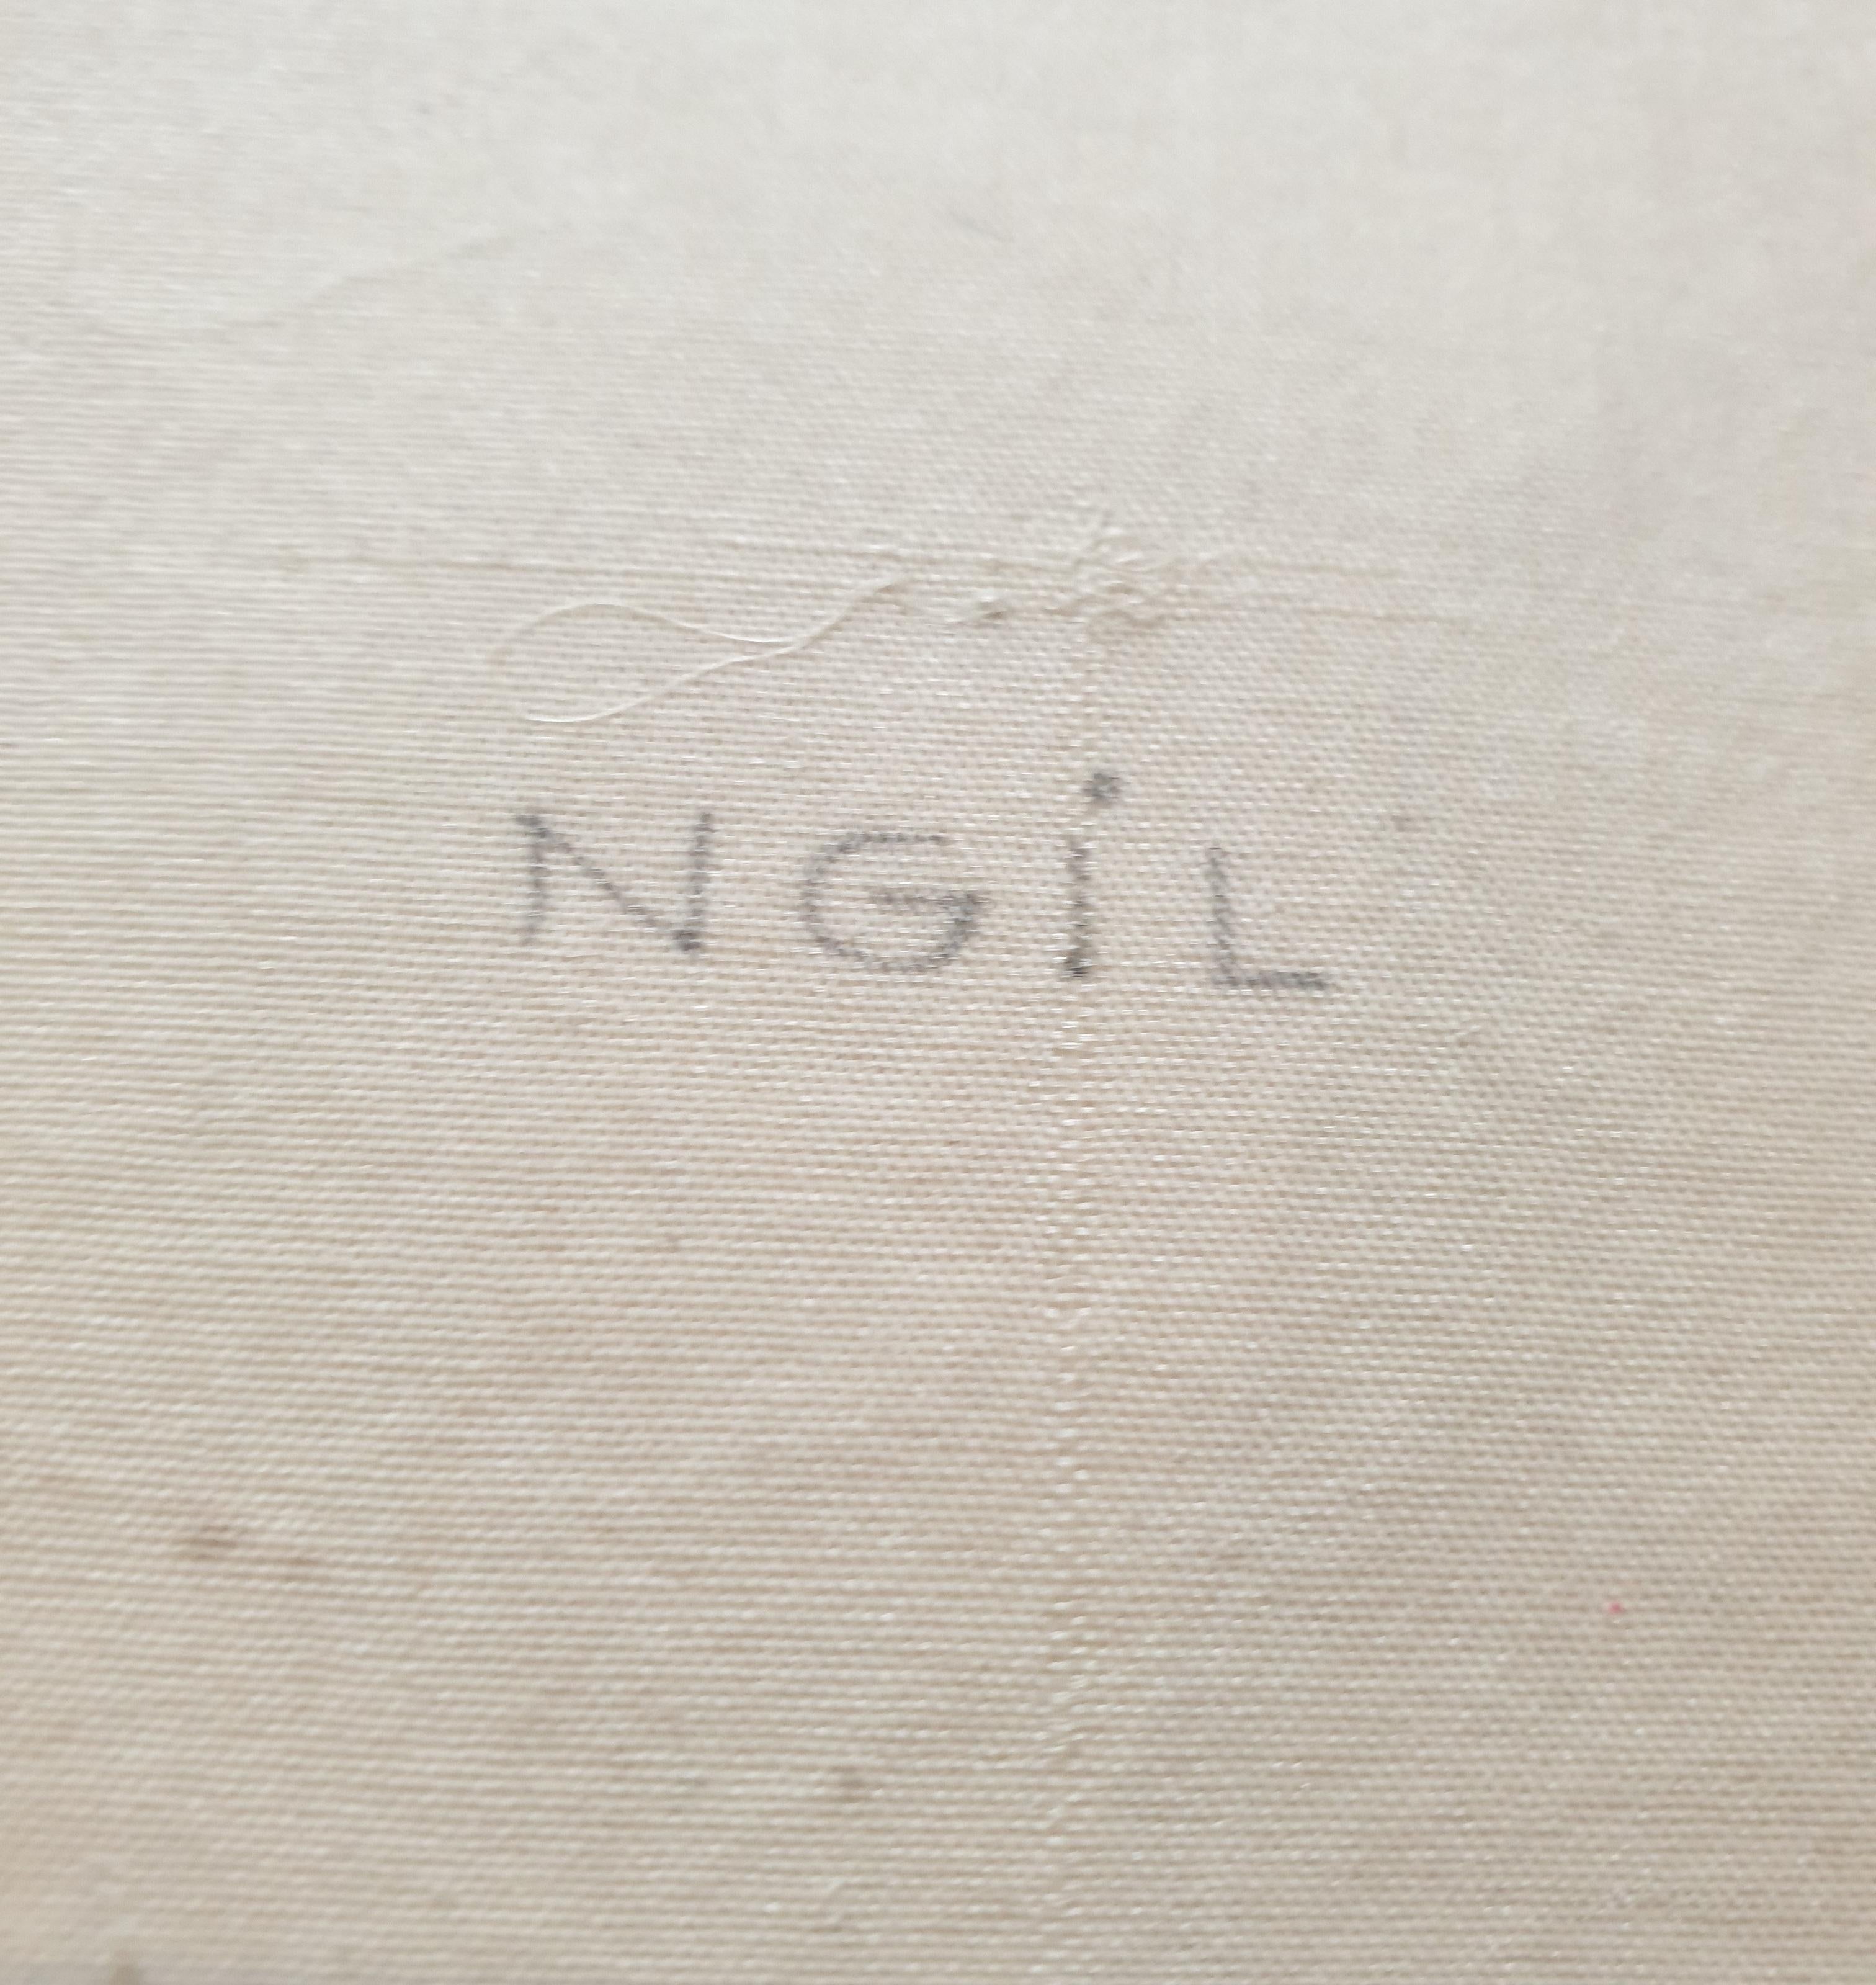 Watercolour on handmade paper of a 'Ngil' mask applied to Vélin d'Arches paper by French artist La Roche Laffitte. Titled to the centre and signed by the artist to the left.

A beautifully observed and detailed study of a 'Ngil' mask in light